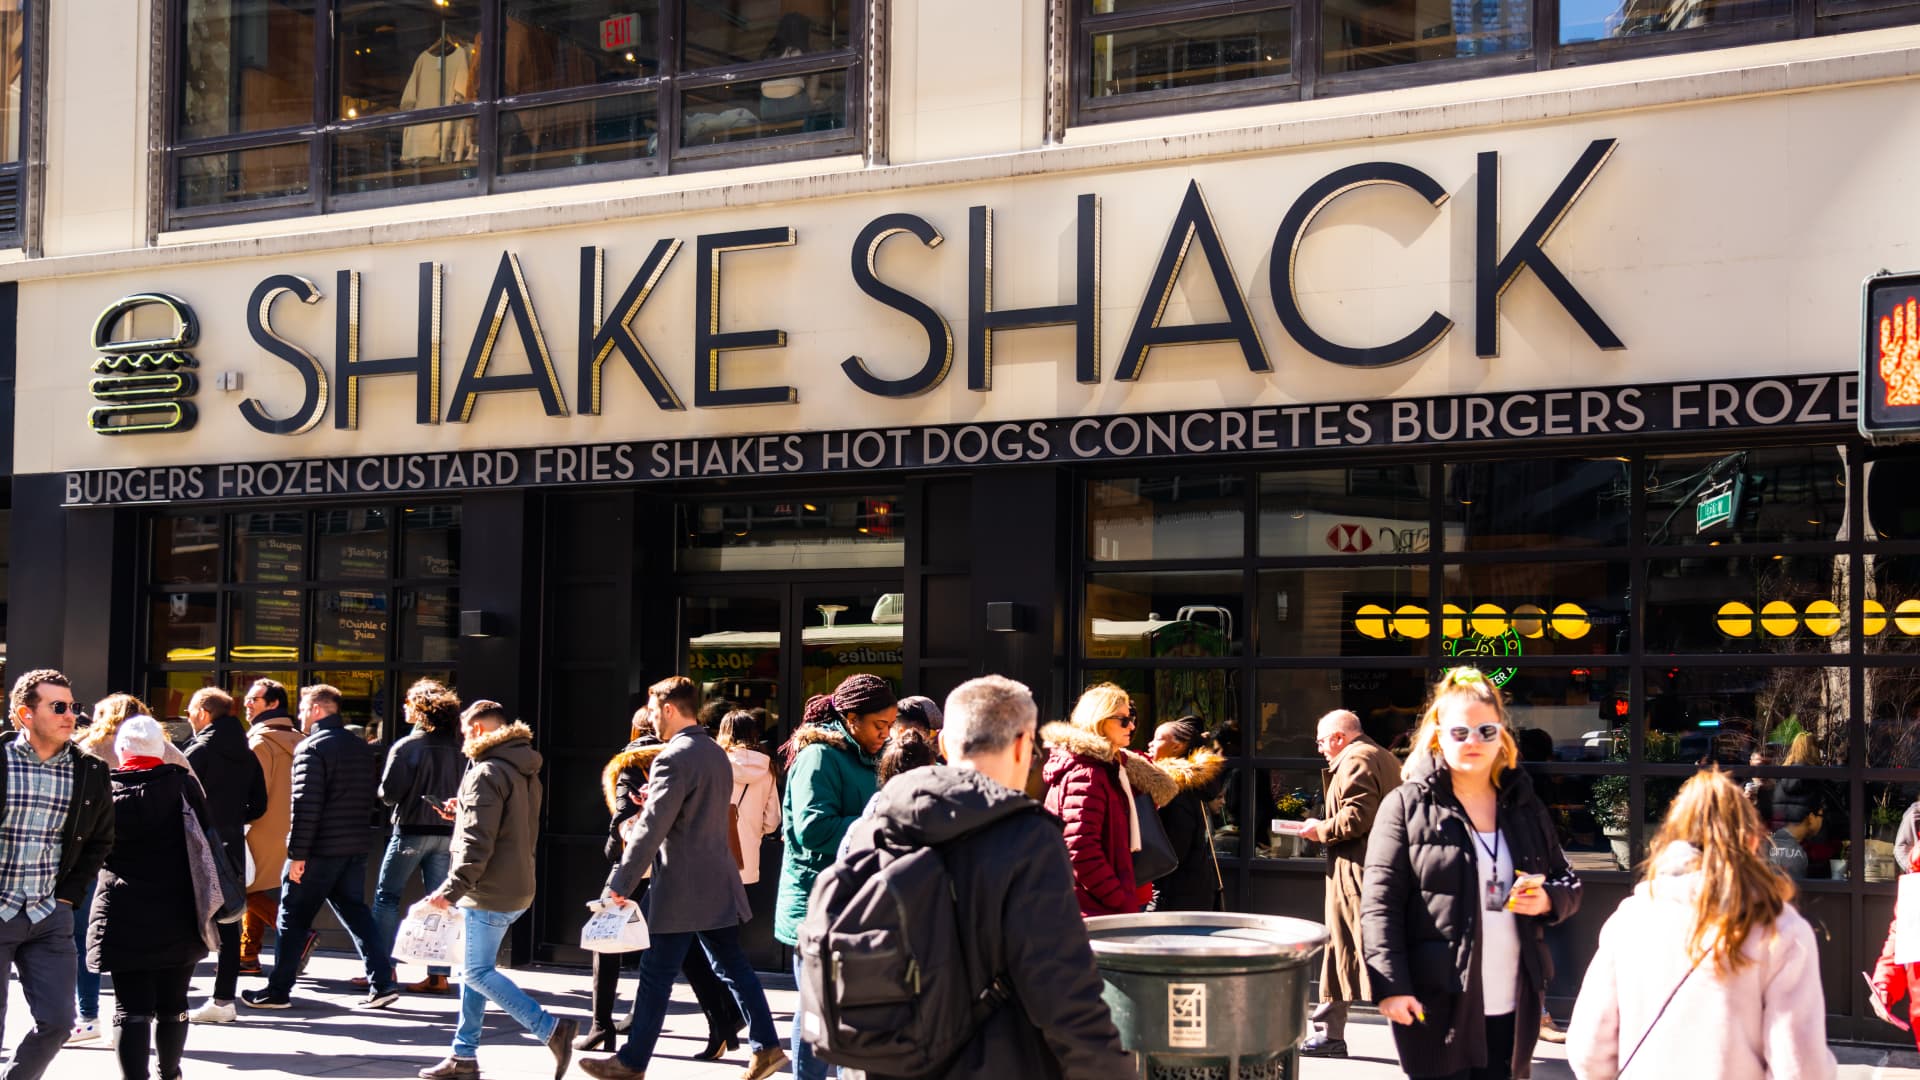 Here’s why Shake Shack’s recent deal with Engaged Capital may have fallen short for shareholders